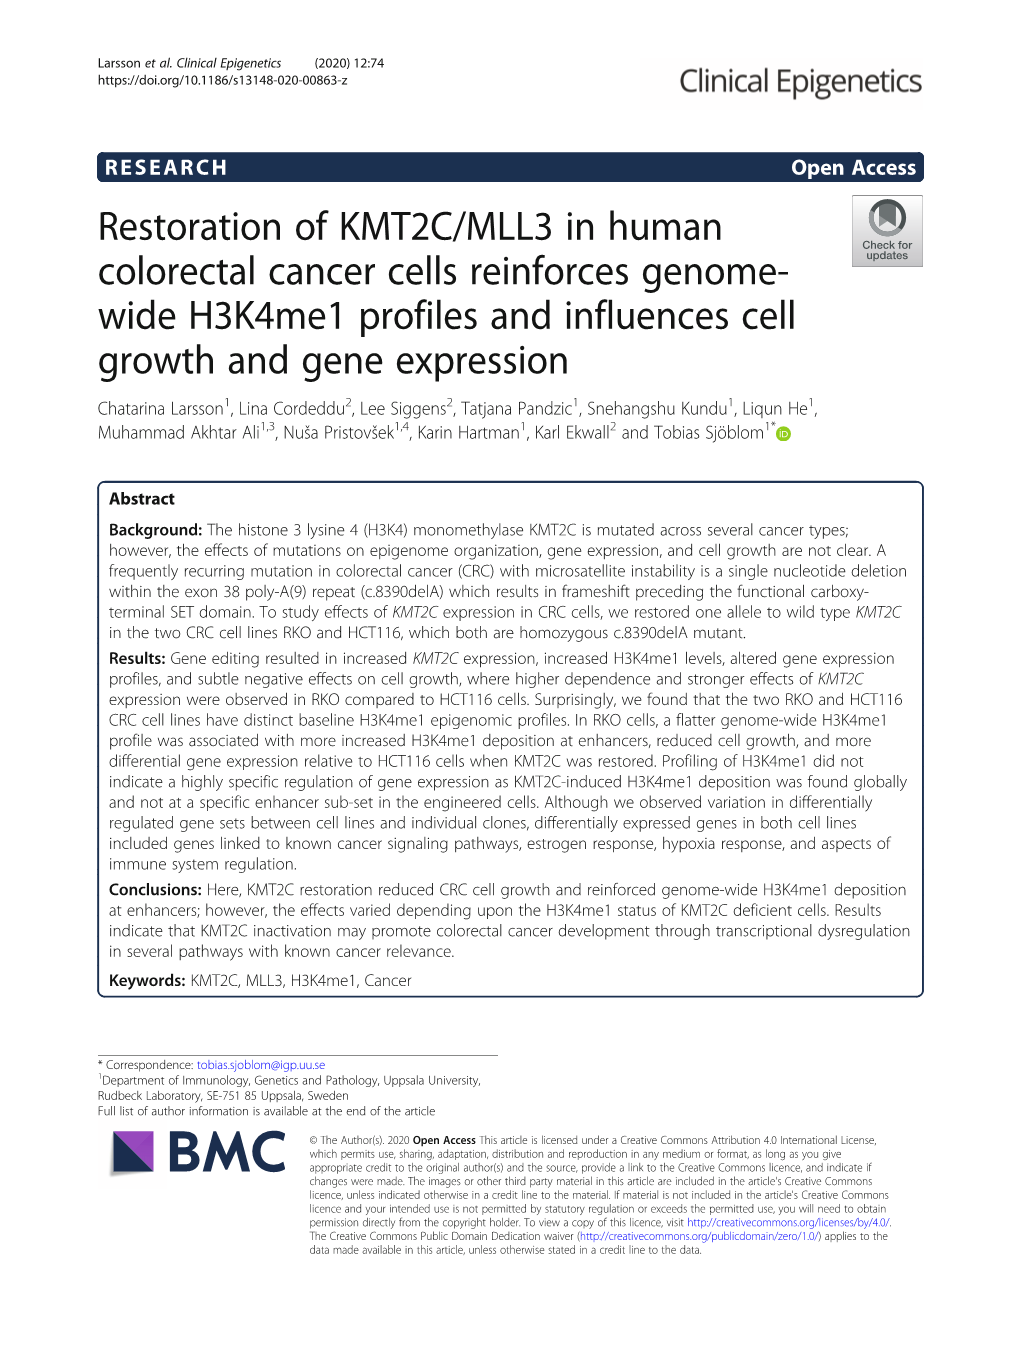 Restoration of KMT2C/MLL3 in Human Colorectal Cancer Cells Reinforces Genome-Wide H3k4me1 Profiles and Influences Cell Growth An